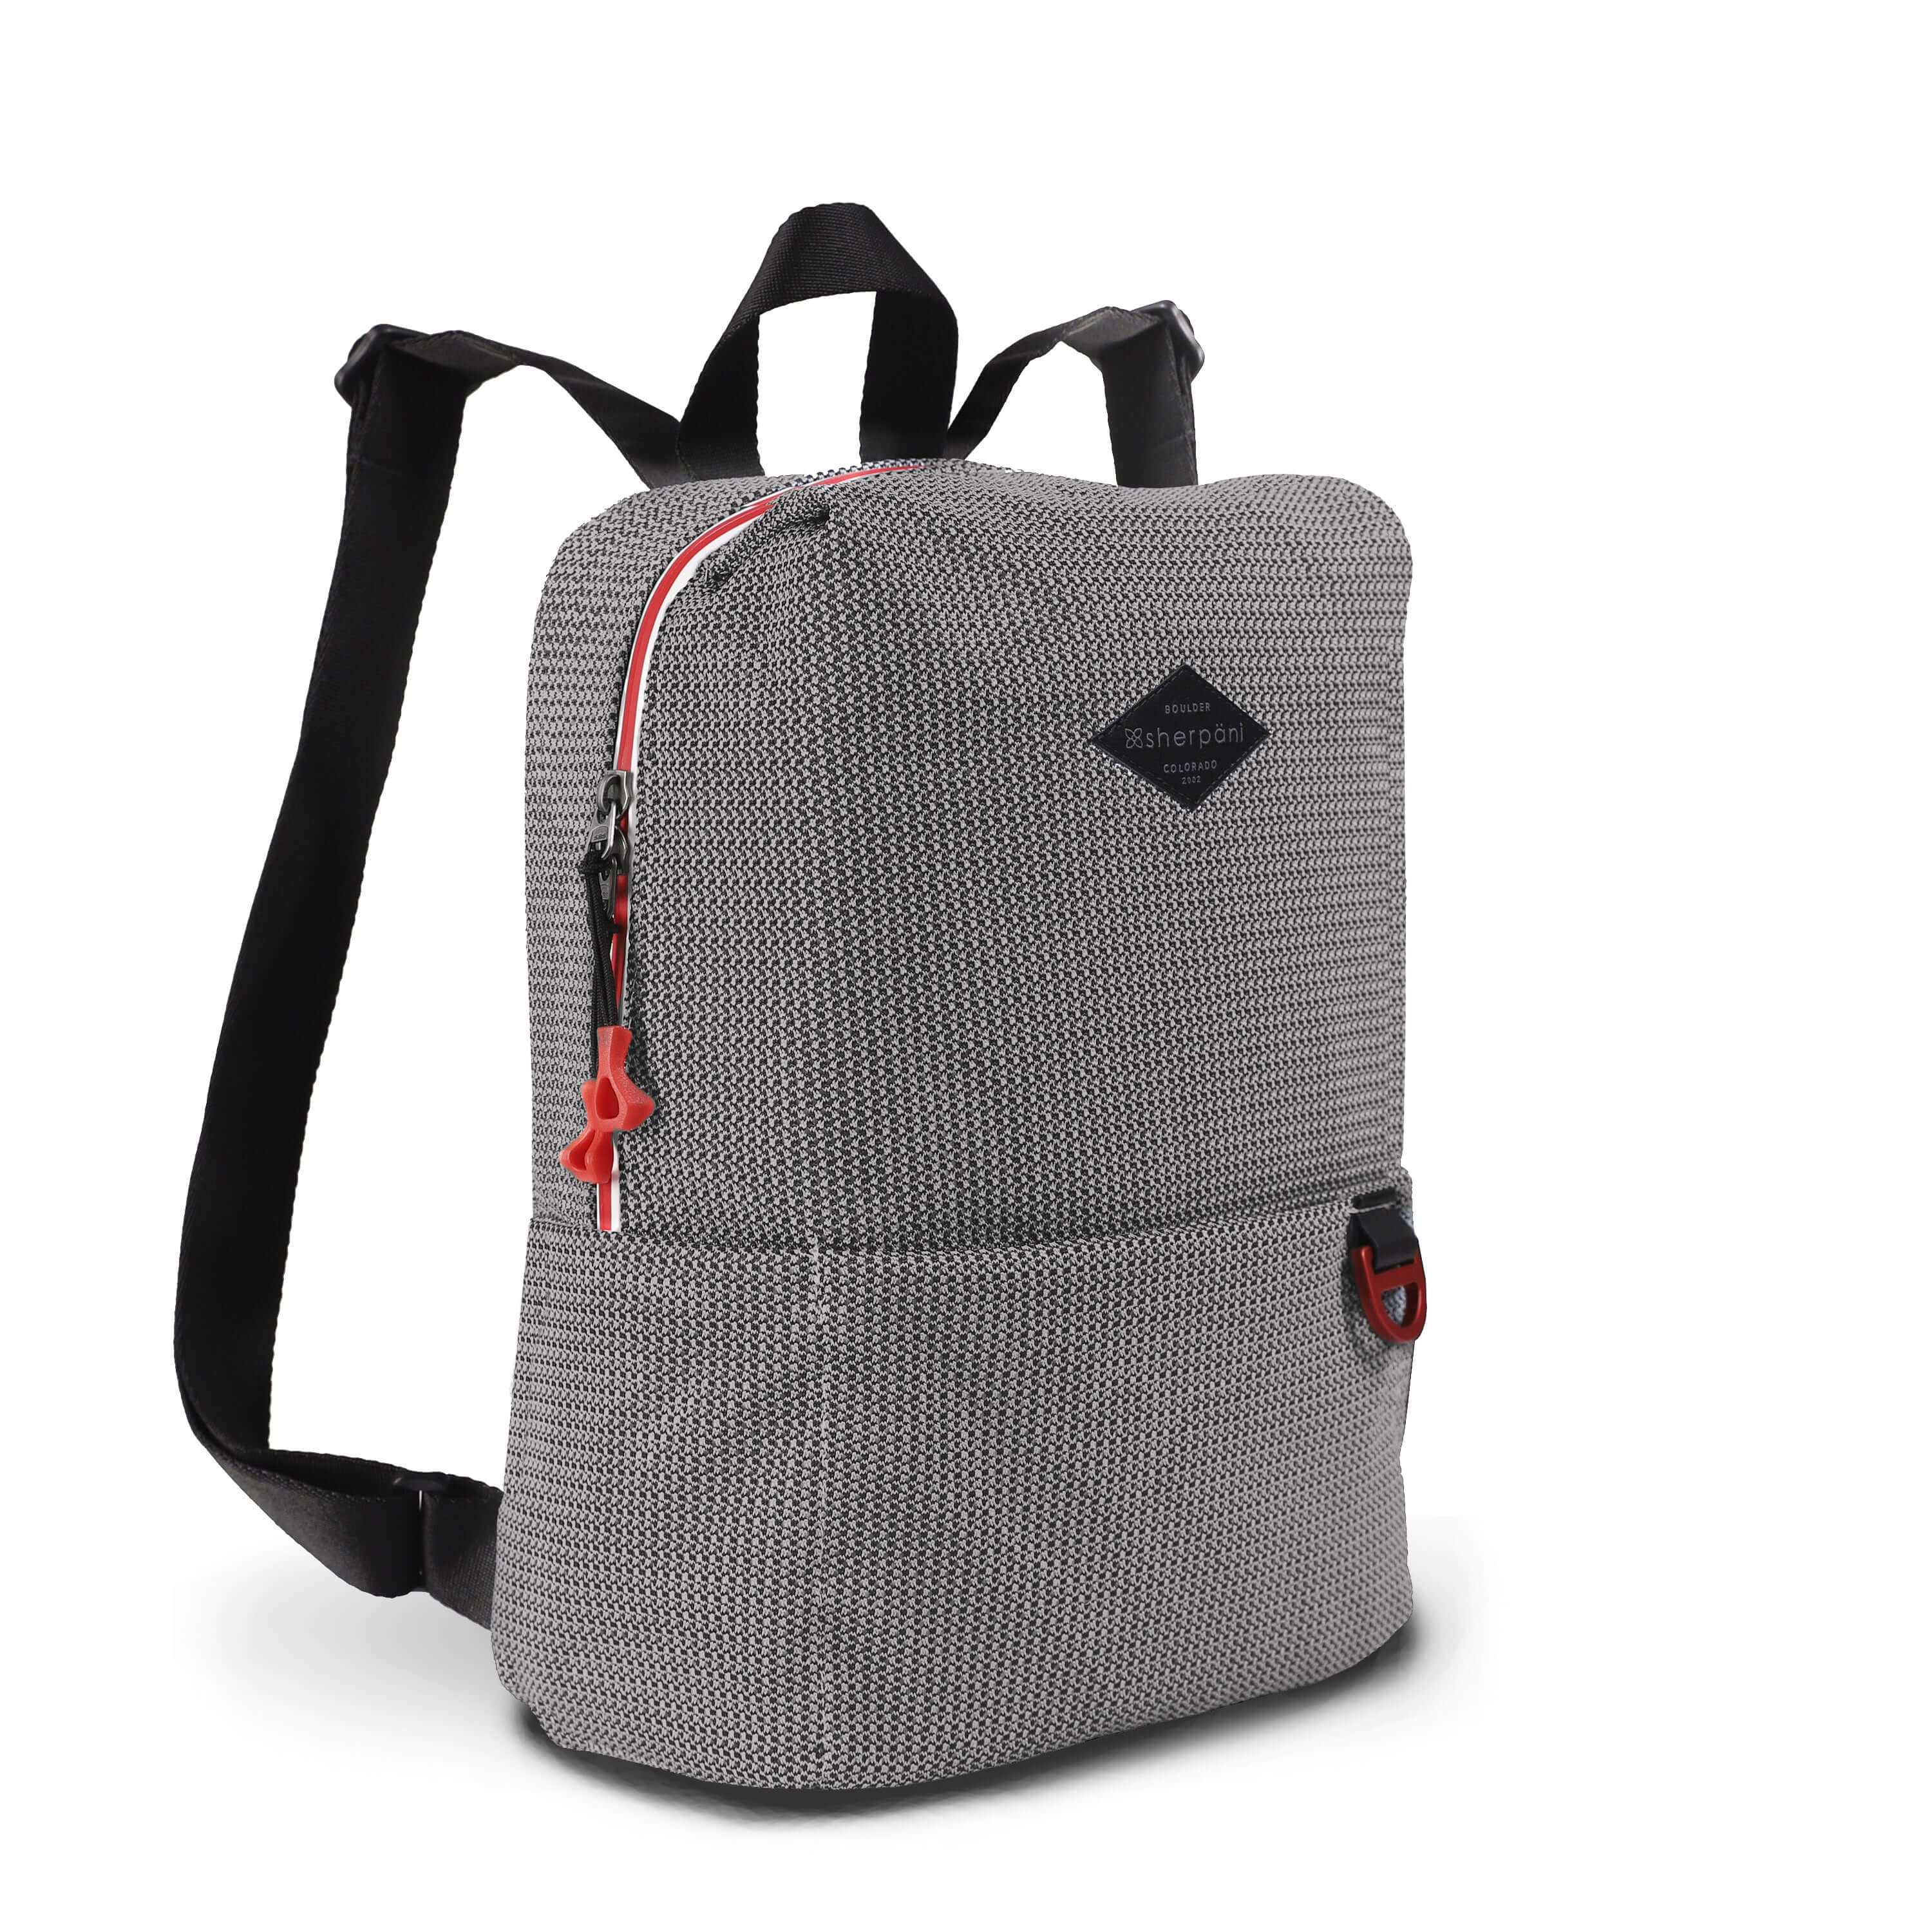 Angled front view of Sherpani mesh backpack, the Adaline. It has a black and white mesh pattern and features red pops of color on the accent buckle and easy-pull zipper. The bag has black adjustable backpack straps and a tote handle for easy carrying.